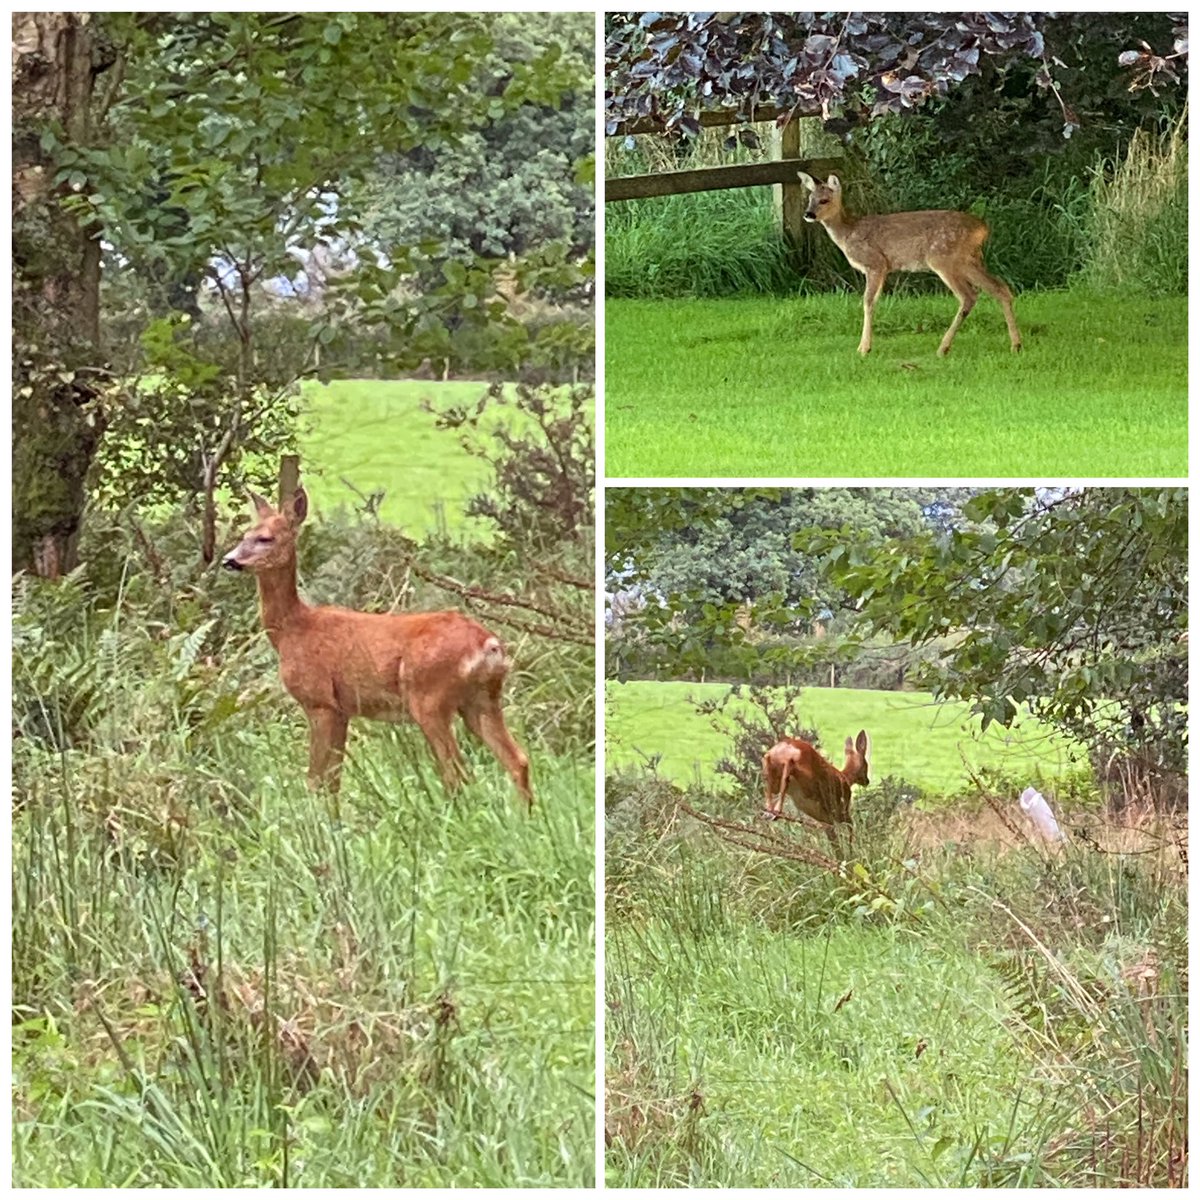 Good to see the deer again that have kept us company during our week in the Lake District before we set off for home.